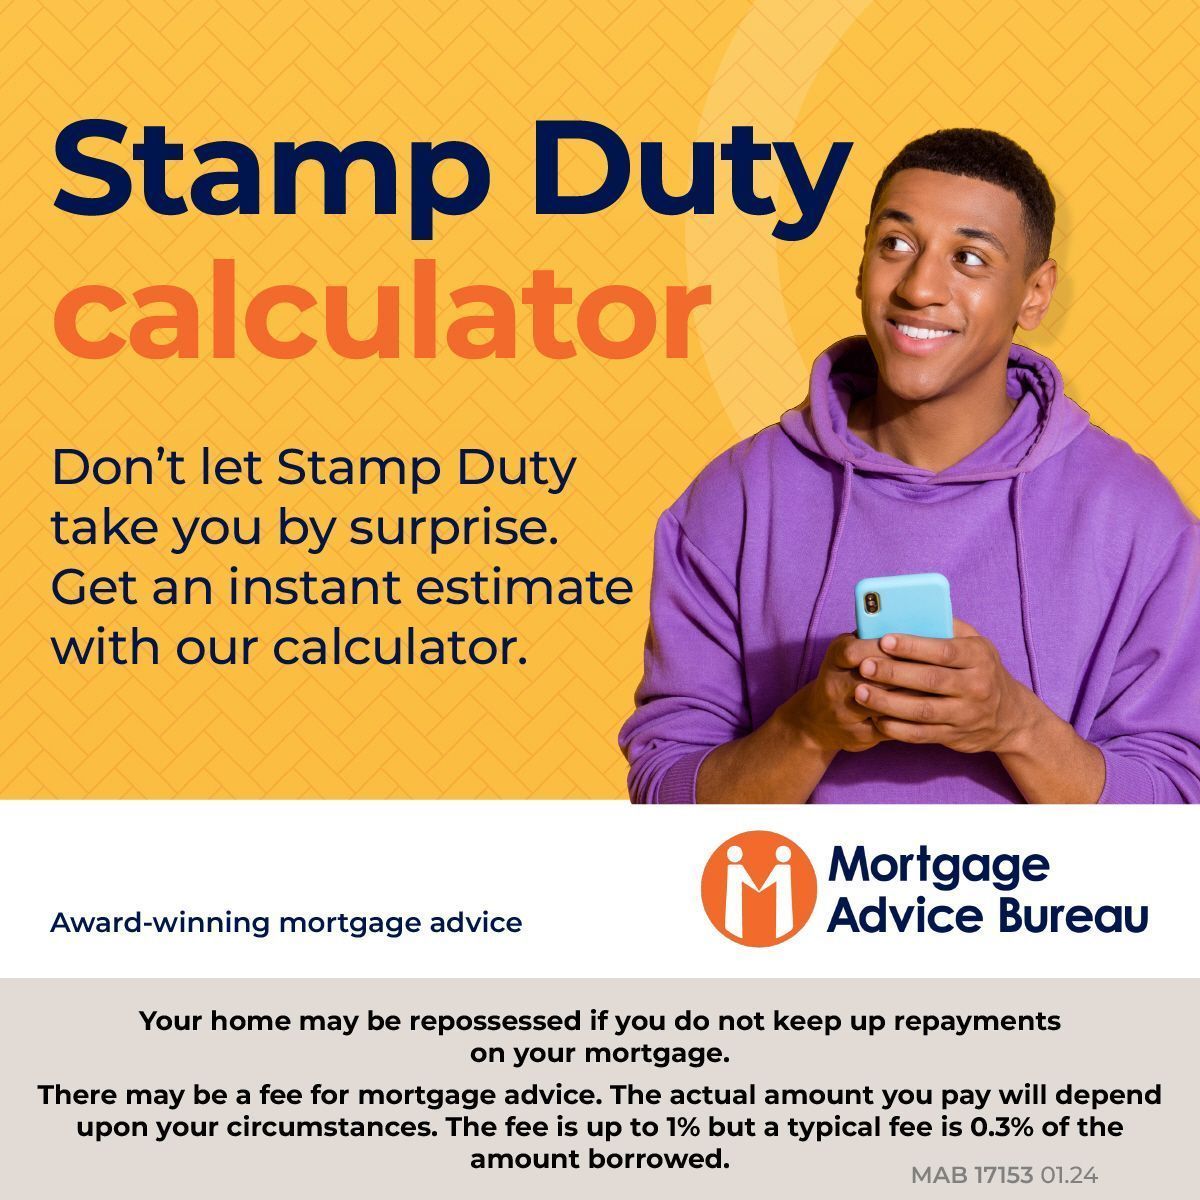 Need help estimating your Stamp Duty?
Check out our handy calculator! buff.ly/4aR2bOh 🧮

📞 01293 525525
📧 mab.crawley@mab.org.uk
🏡 Mon - Fri 9am - 6pm, Sat 9am - 5pm 🏘 

#mortgageadvice #mortgagebroker #mortgagehelp #stampduty #stampdutycalculator